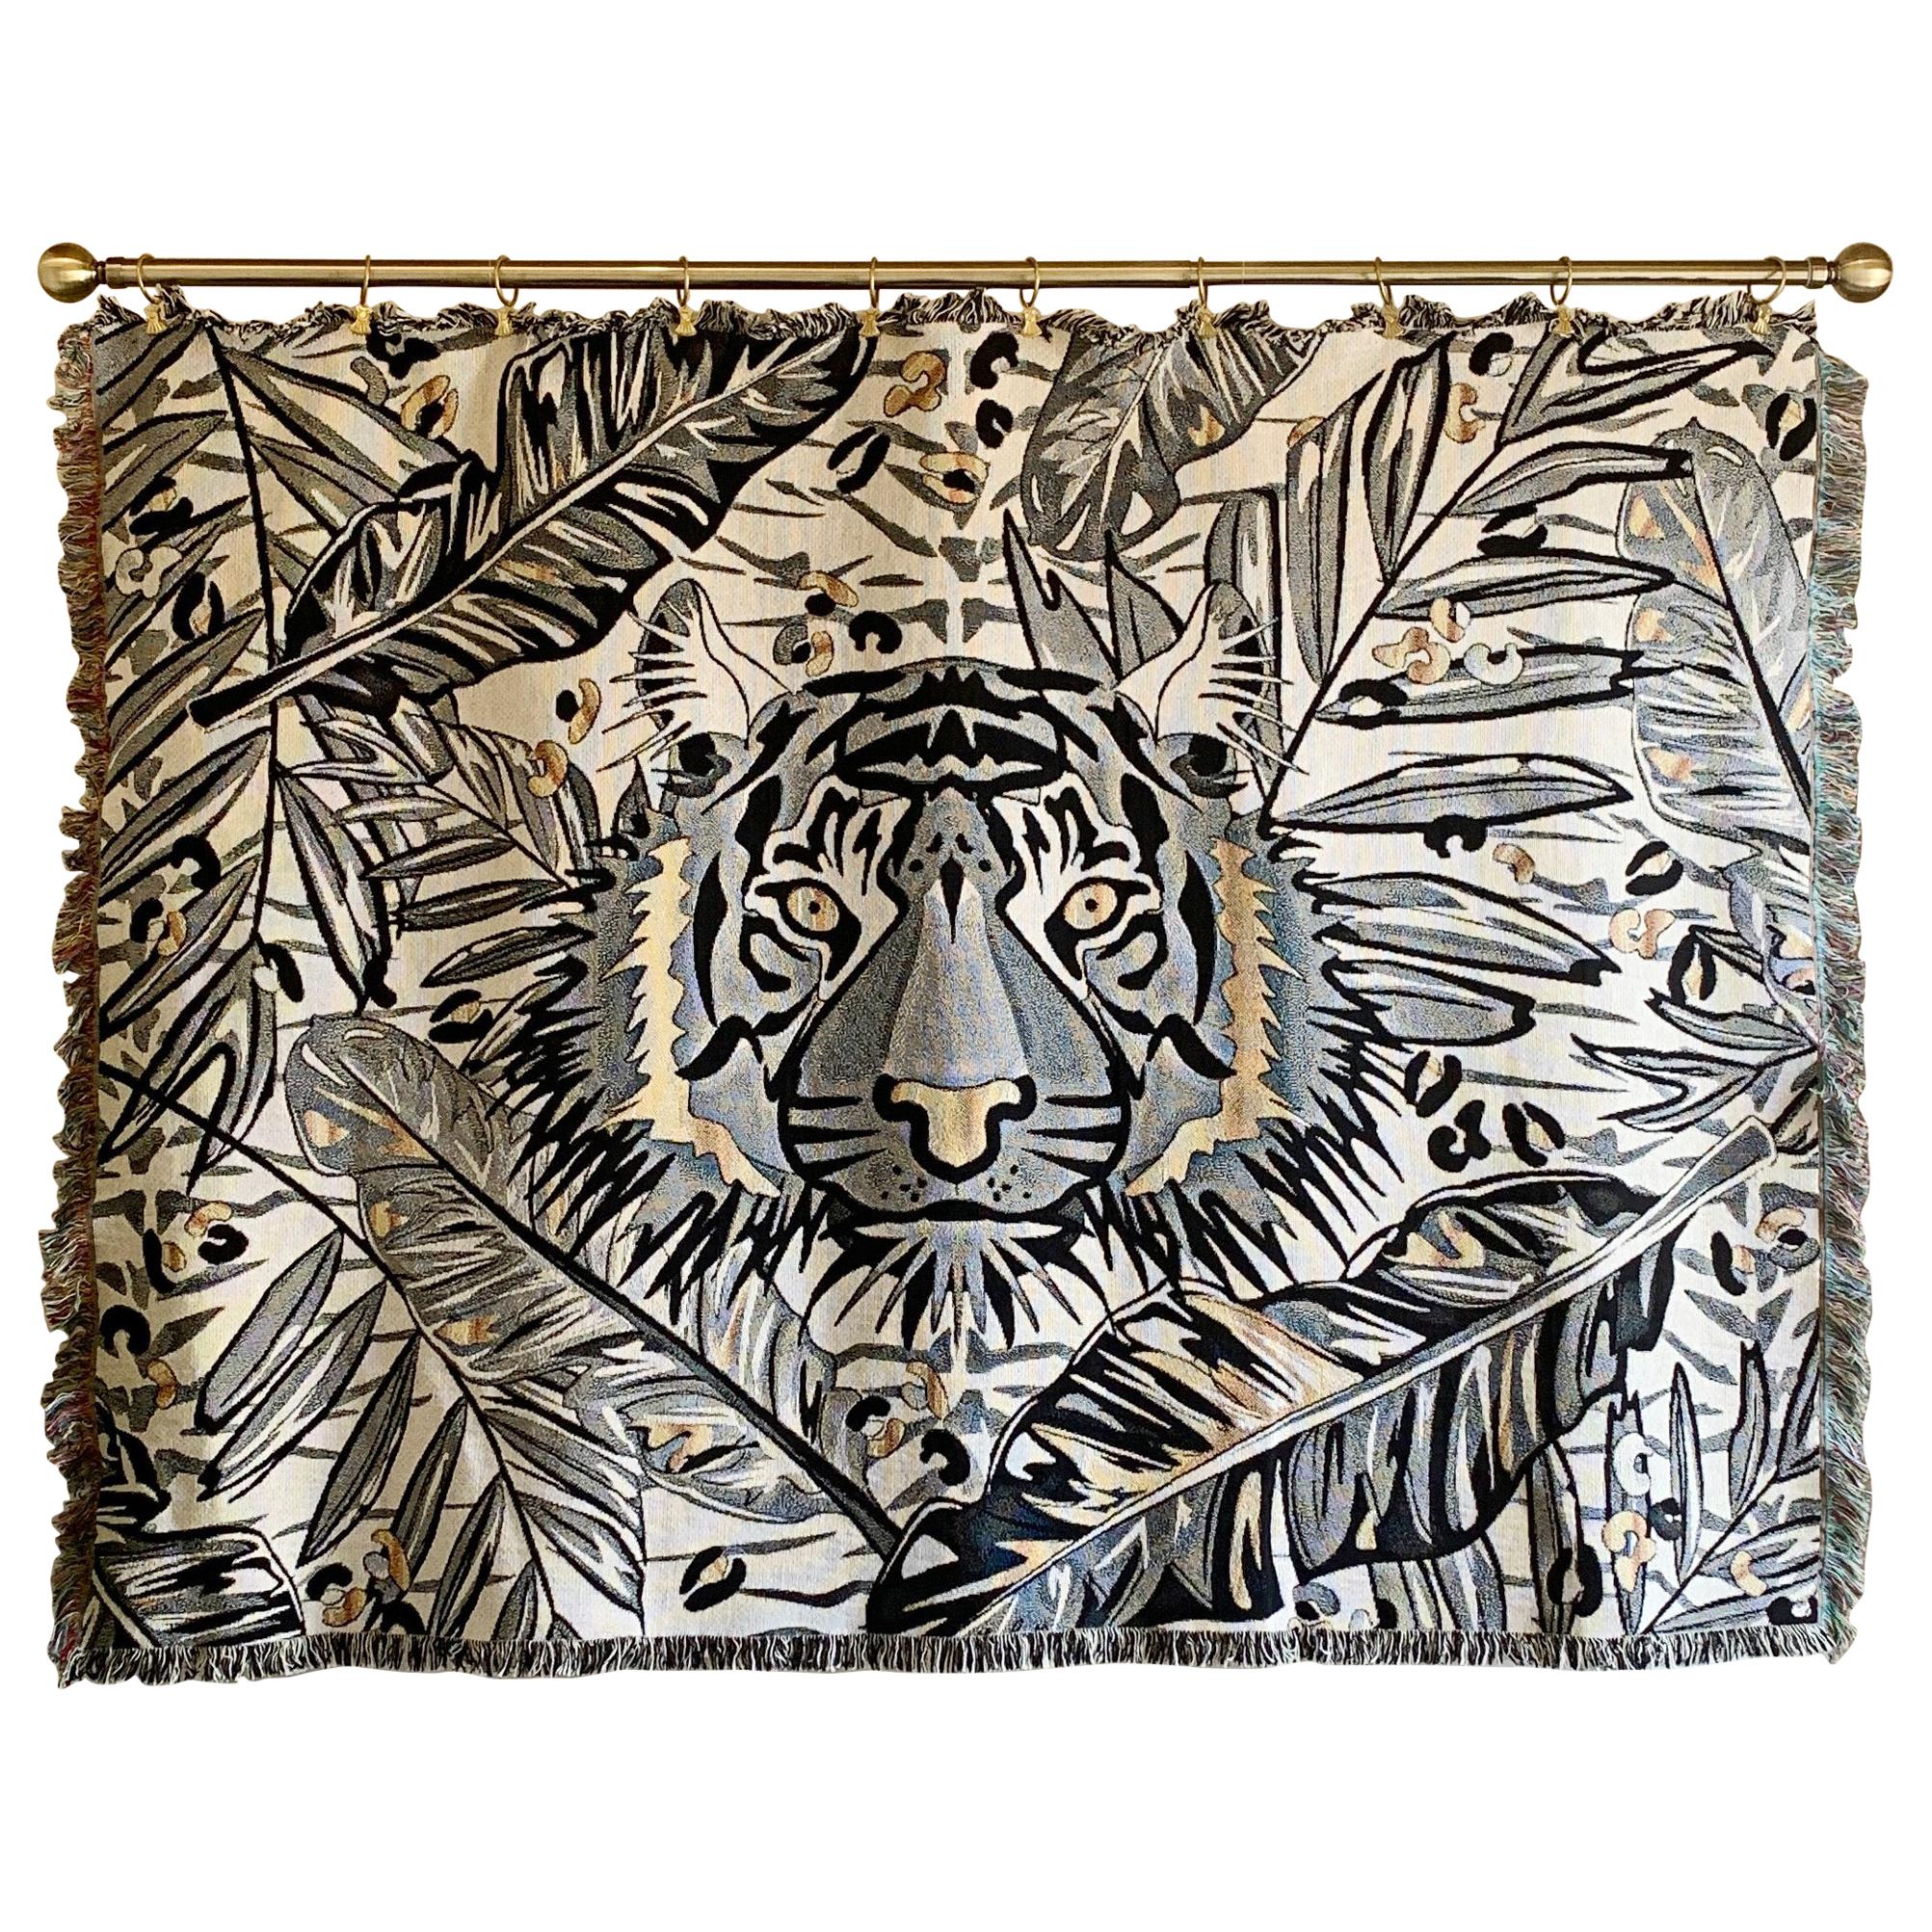 The Tropics Collection 'Tiger' Woven Throw Monochrome and Gold